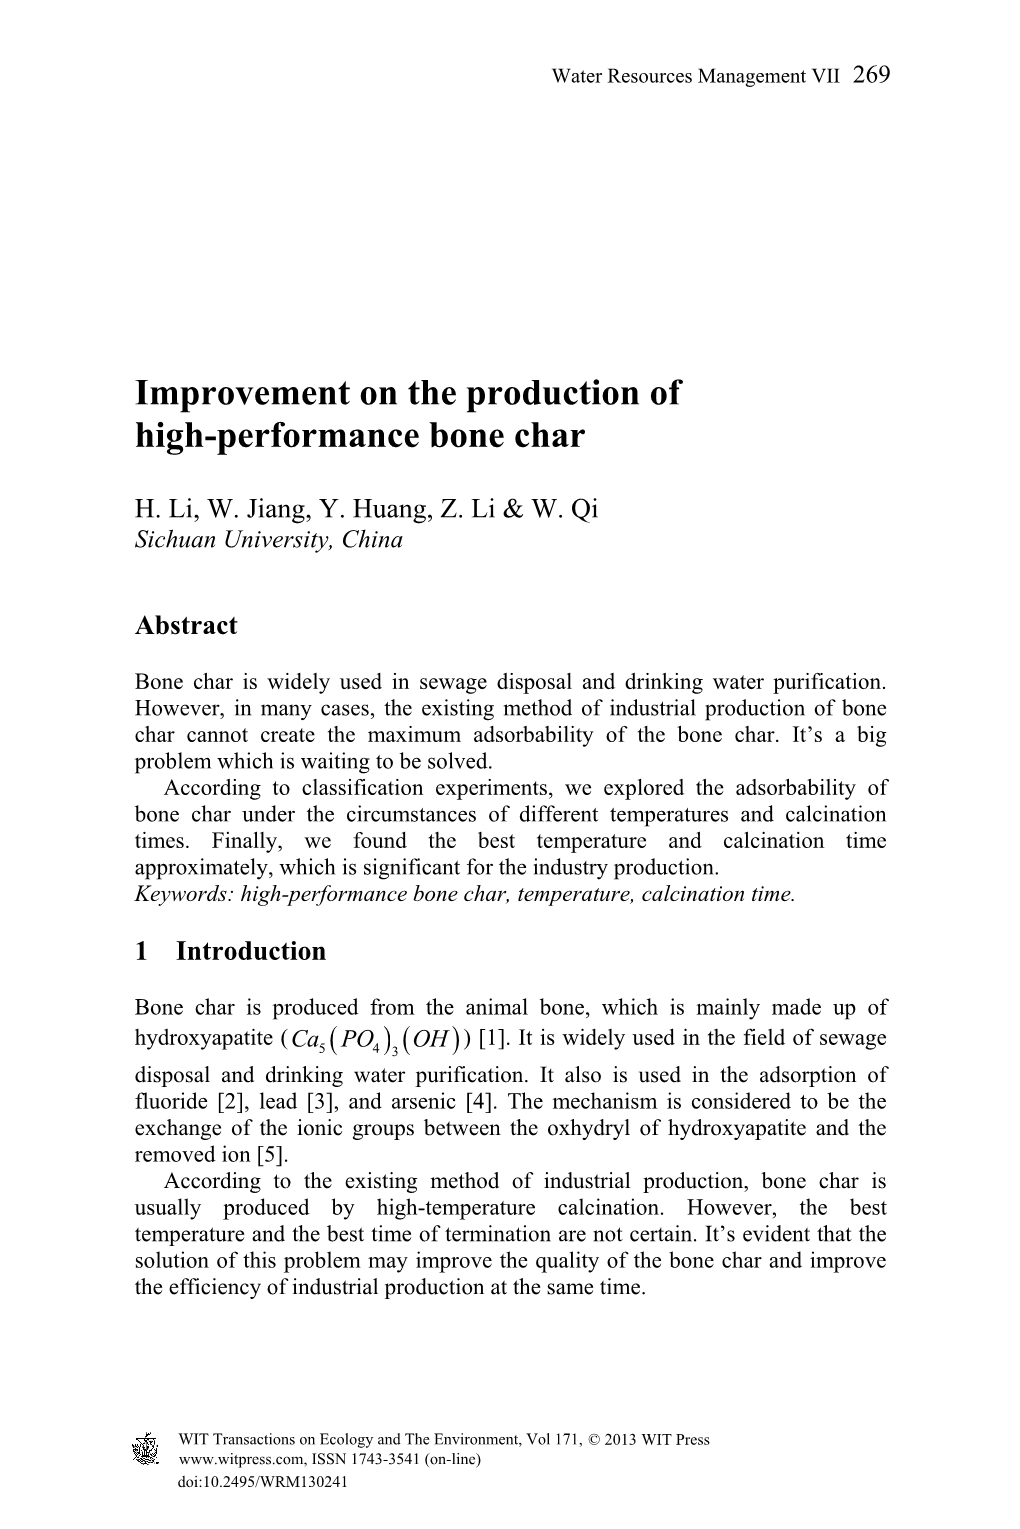 Improvement on the Production of High-Performance Bone Char